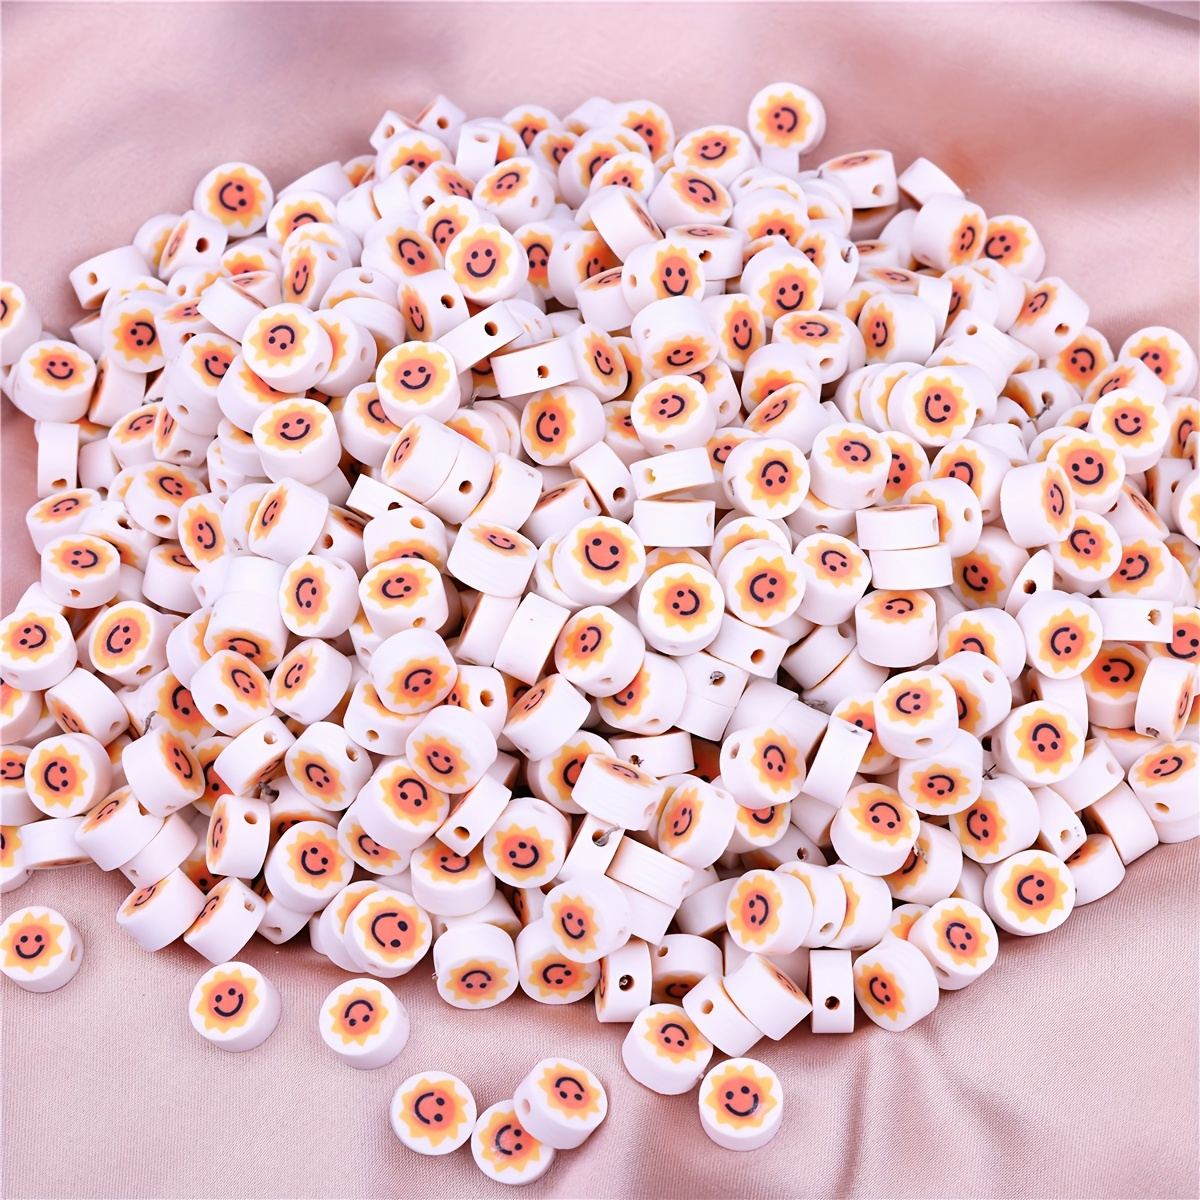 30pcs 10mm Colorful Smile White Clay Beads Flat Round Beads Polymer Beads  for Jewelry Making DIY Hand Made Jewelry Accessories